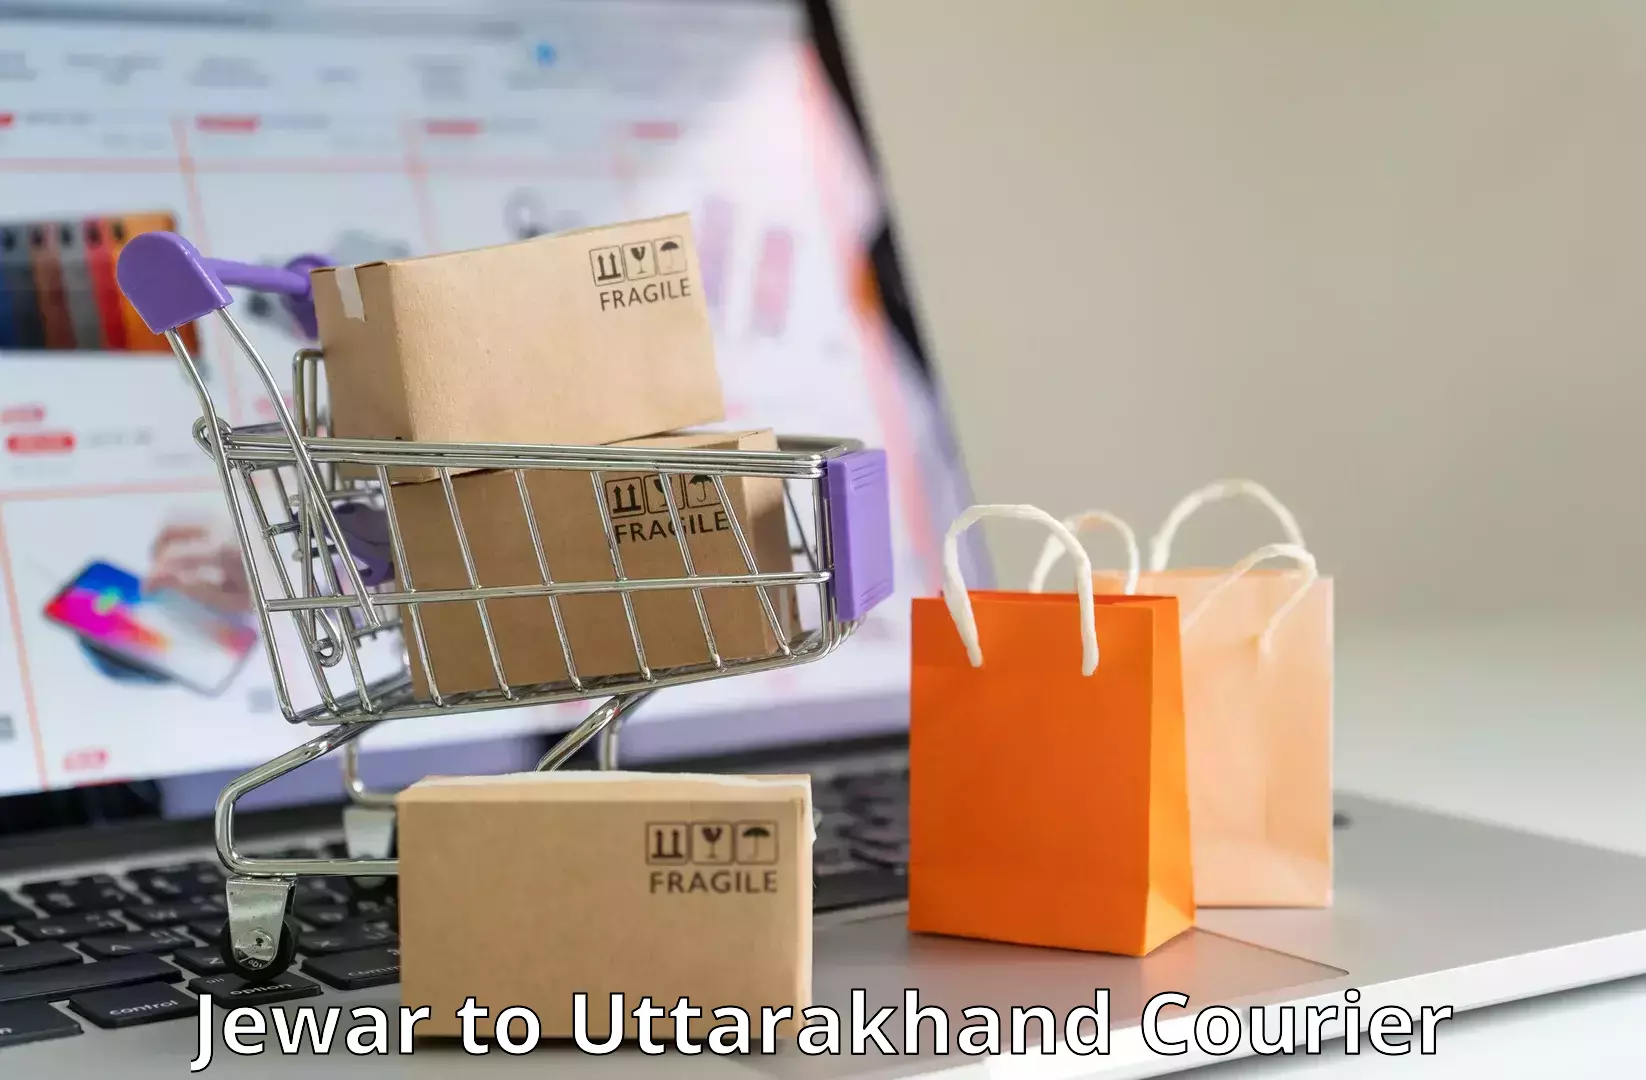 High-quality delivery services Jewar to Haridwar